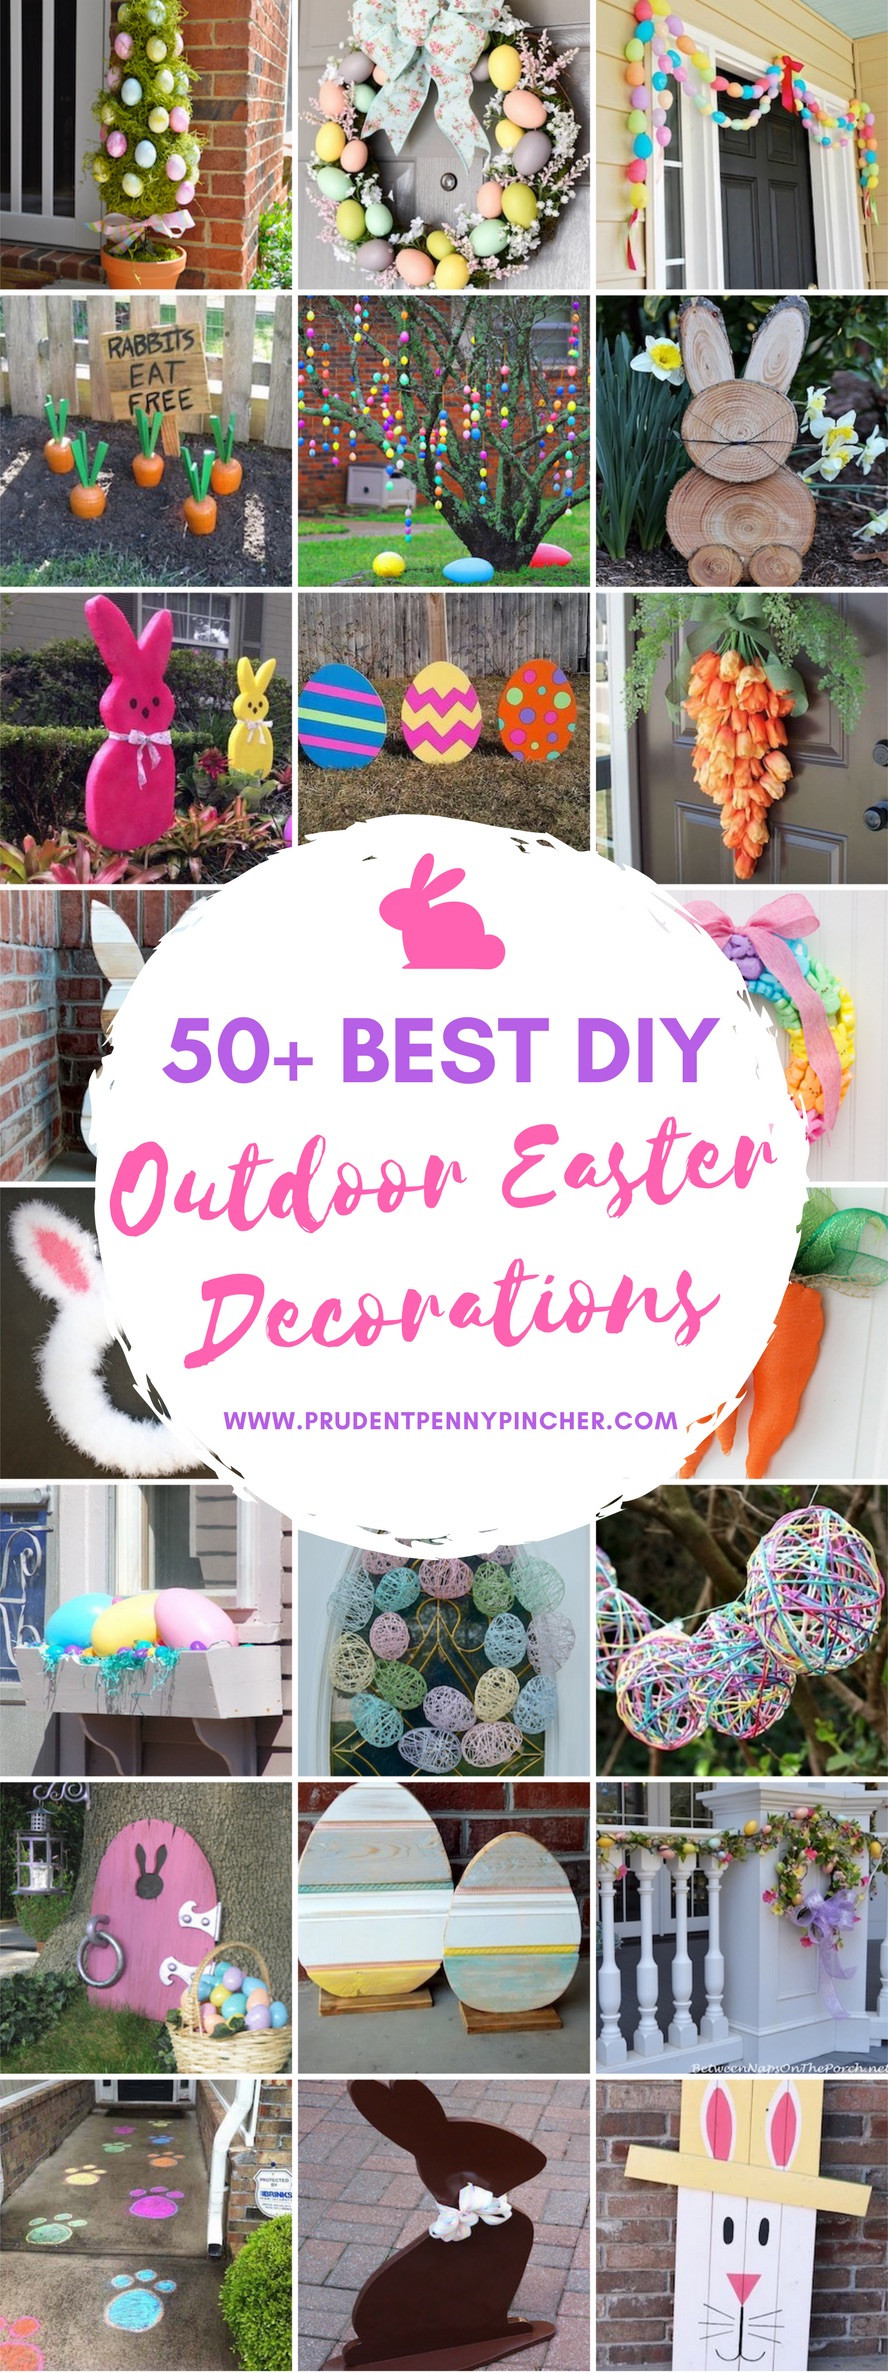 Easter Diy Decorations
 50 Best DIY Outdoor Easter Decorations Prudent Penny Pincher